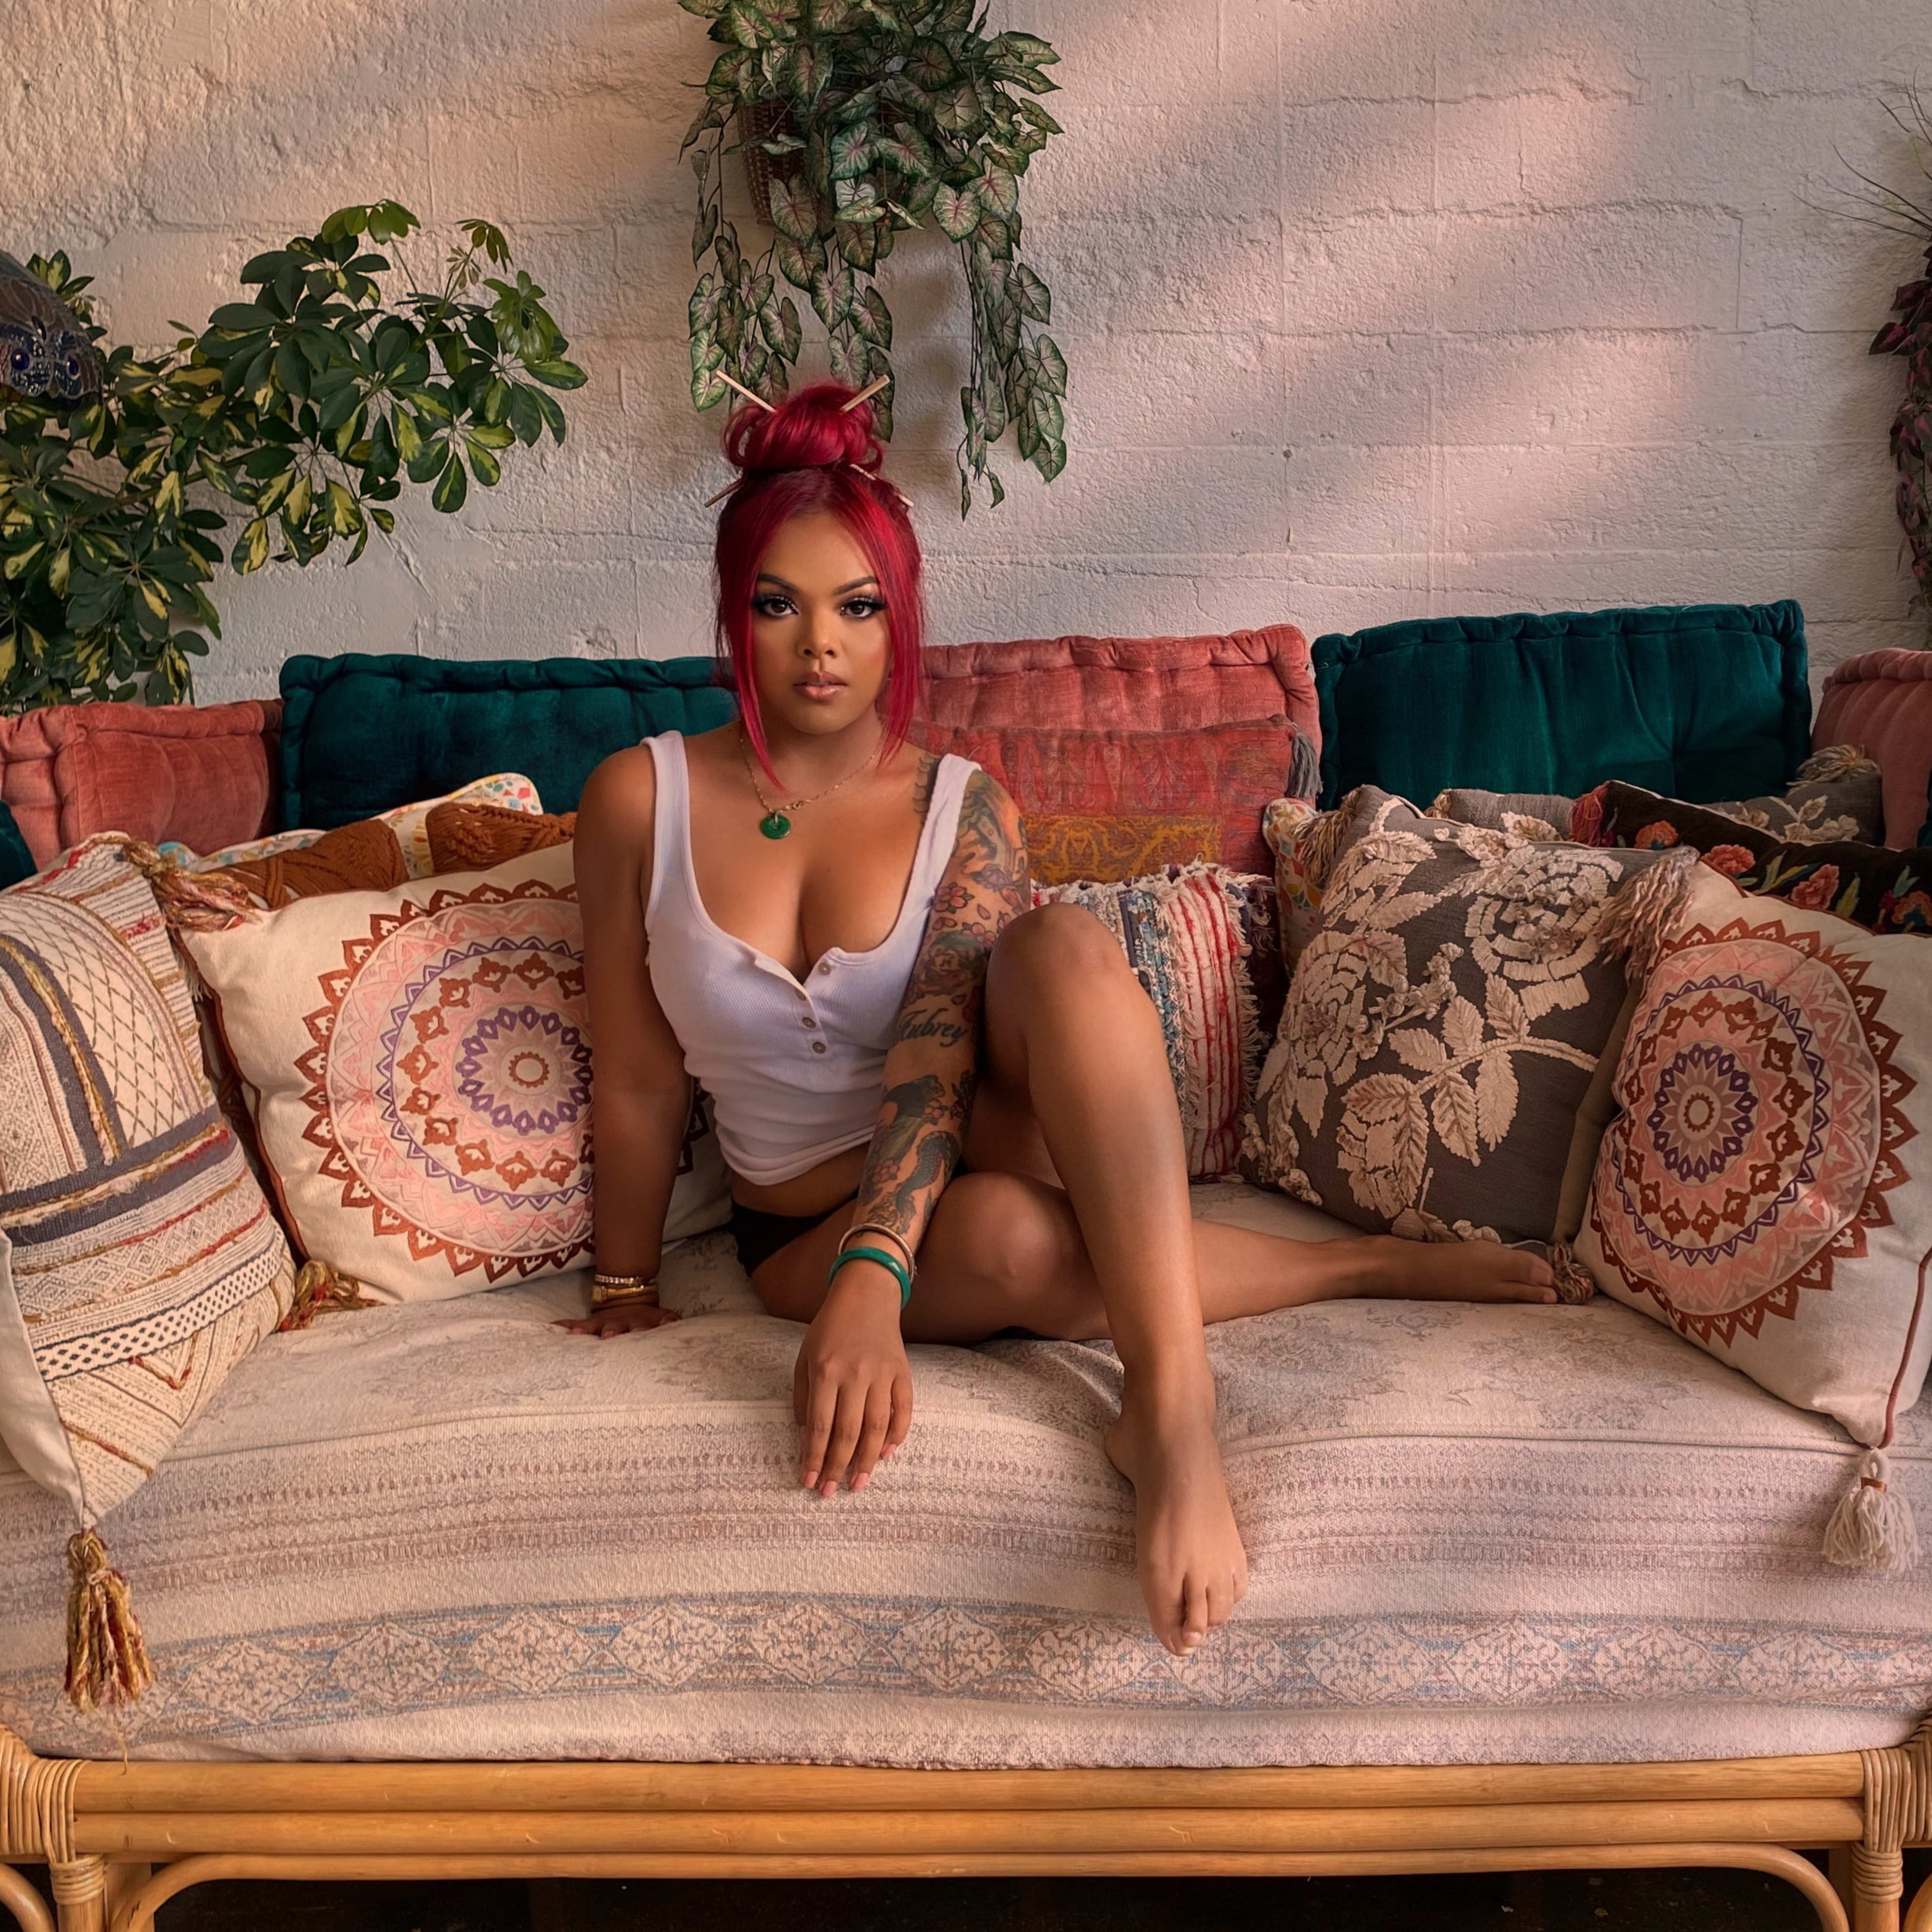 A woman with red hair lounging on a boho couch surrounded by plants during a photo shoot.